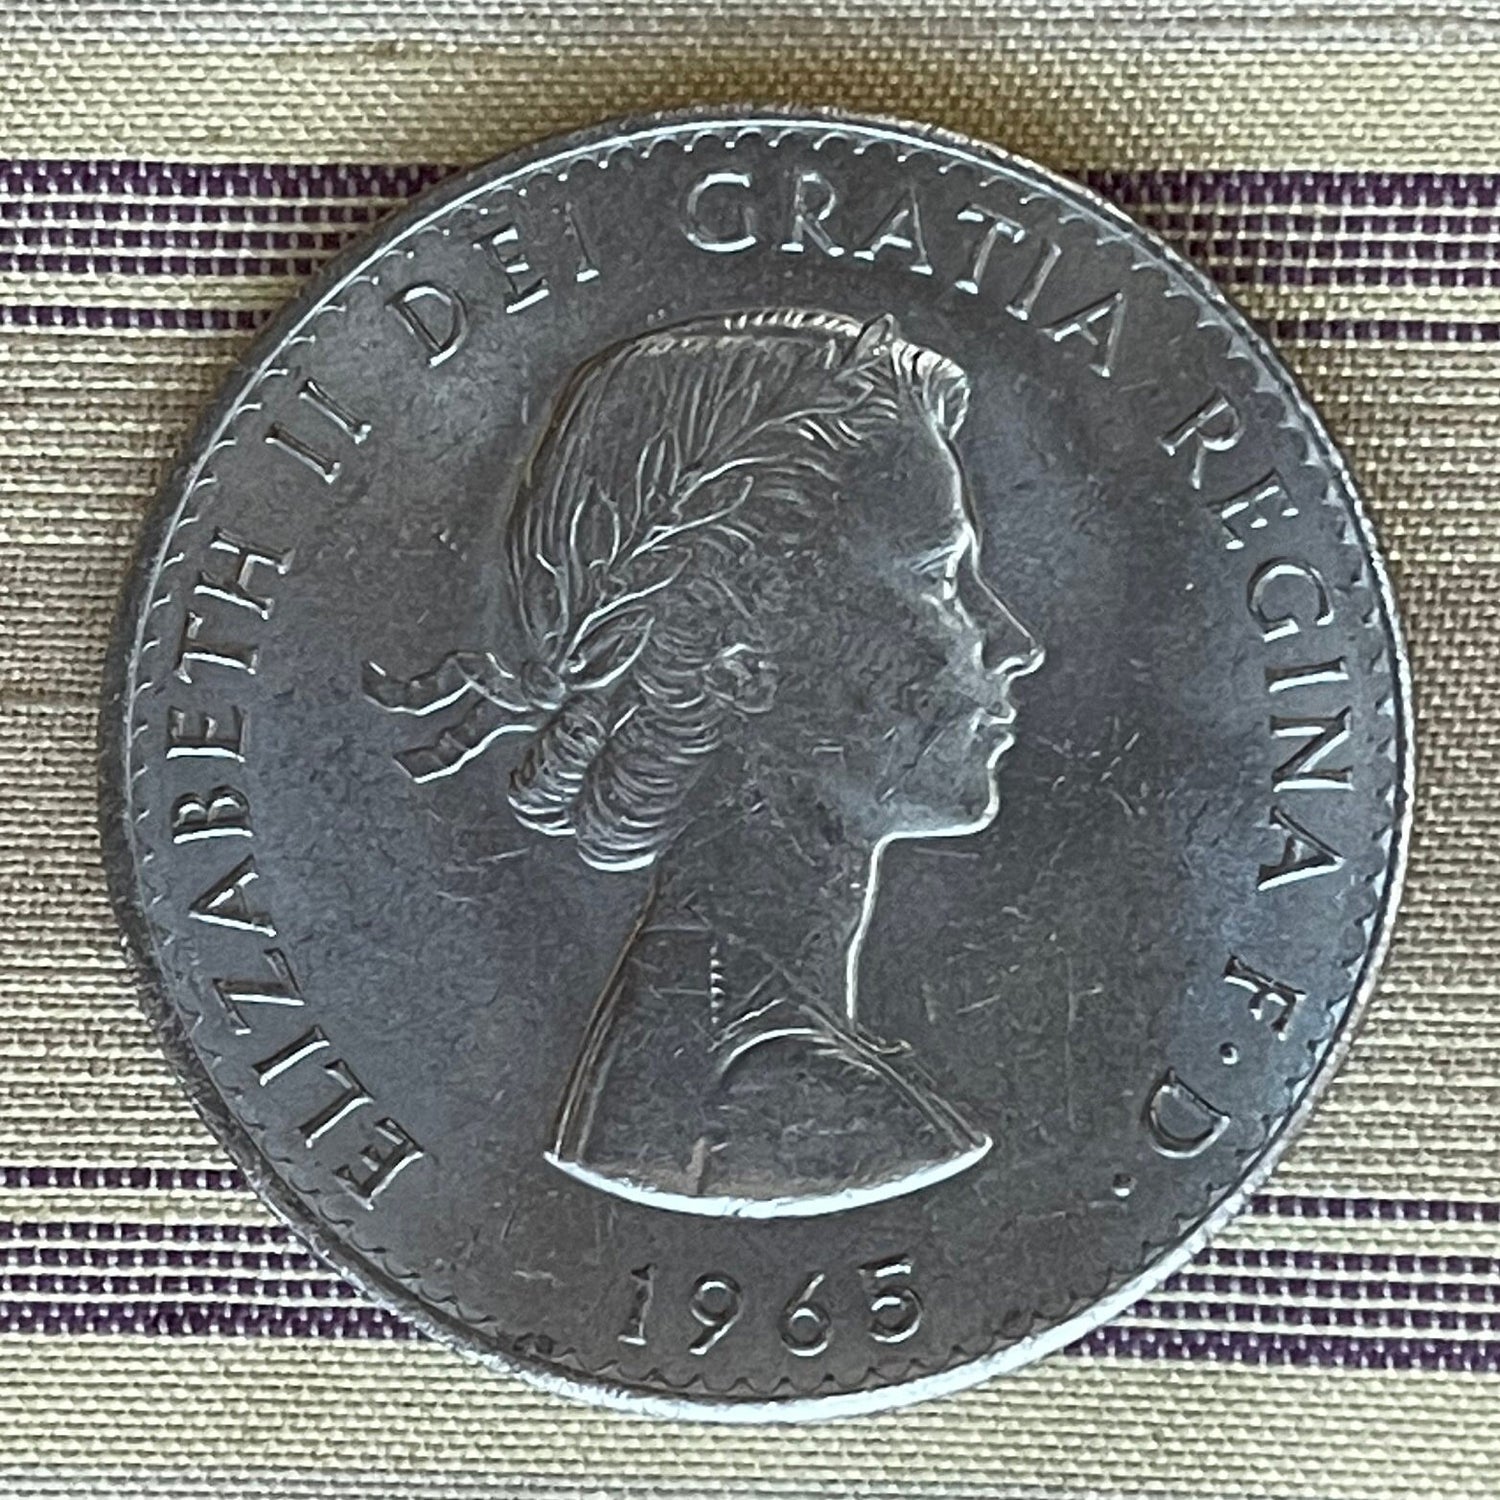 Winston Churchill 1 Crown Authentic Coin Money for Jewelry and Craft Making (Death of Winston Churchill) (1965)